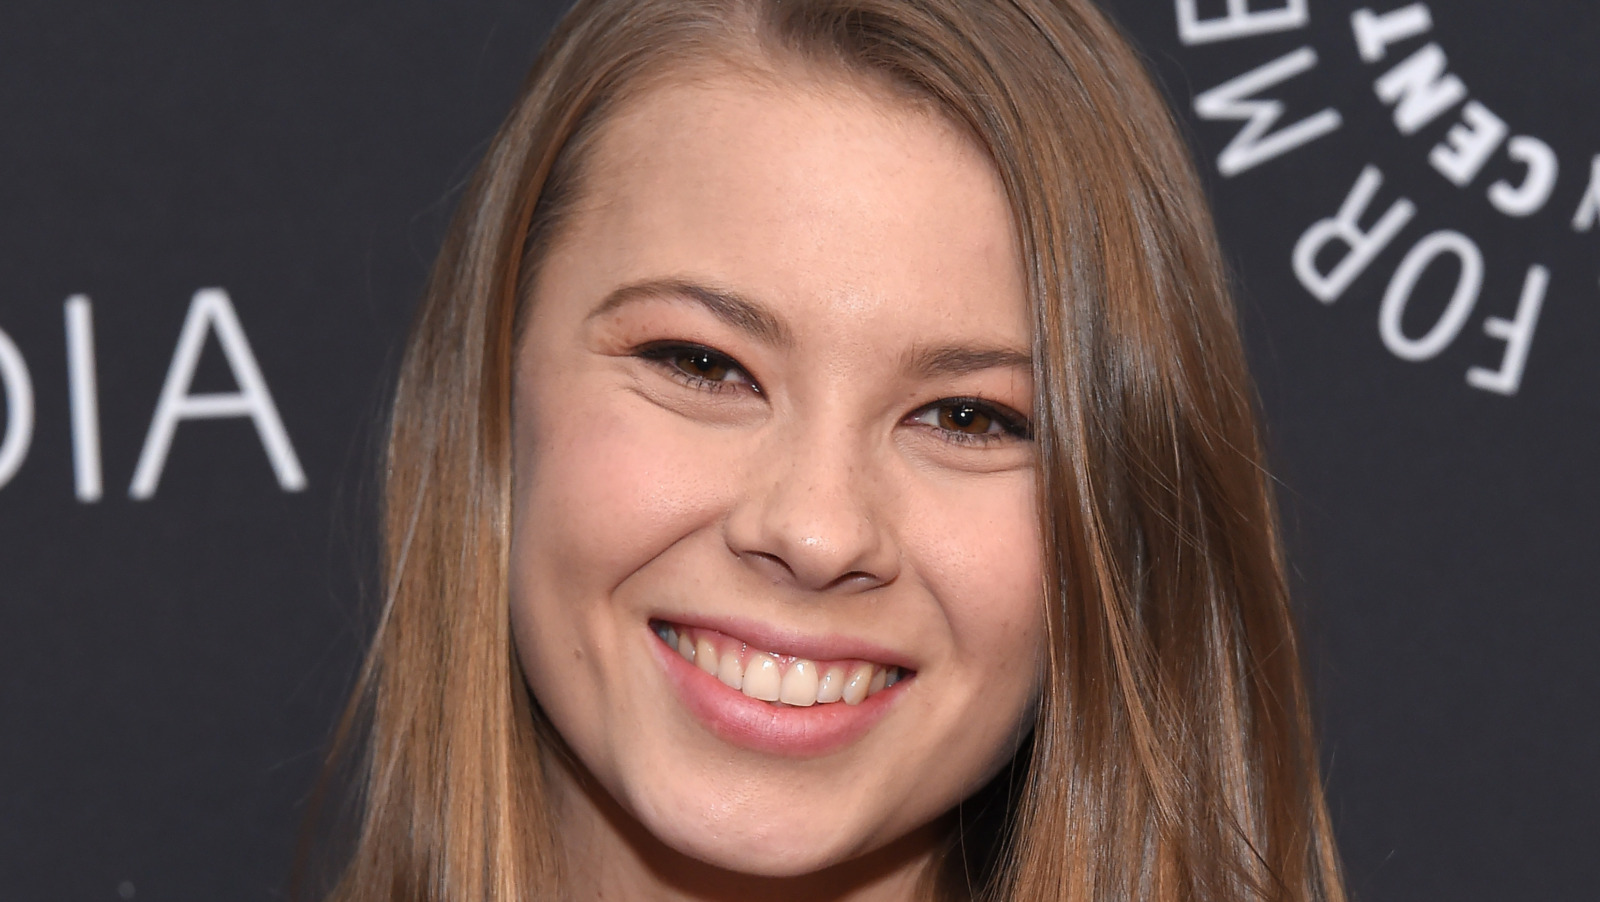 Bindi Irwin has spent much of her life following in the footsteps of her la...